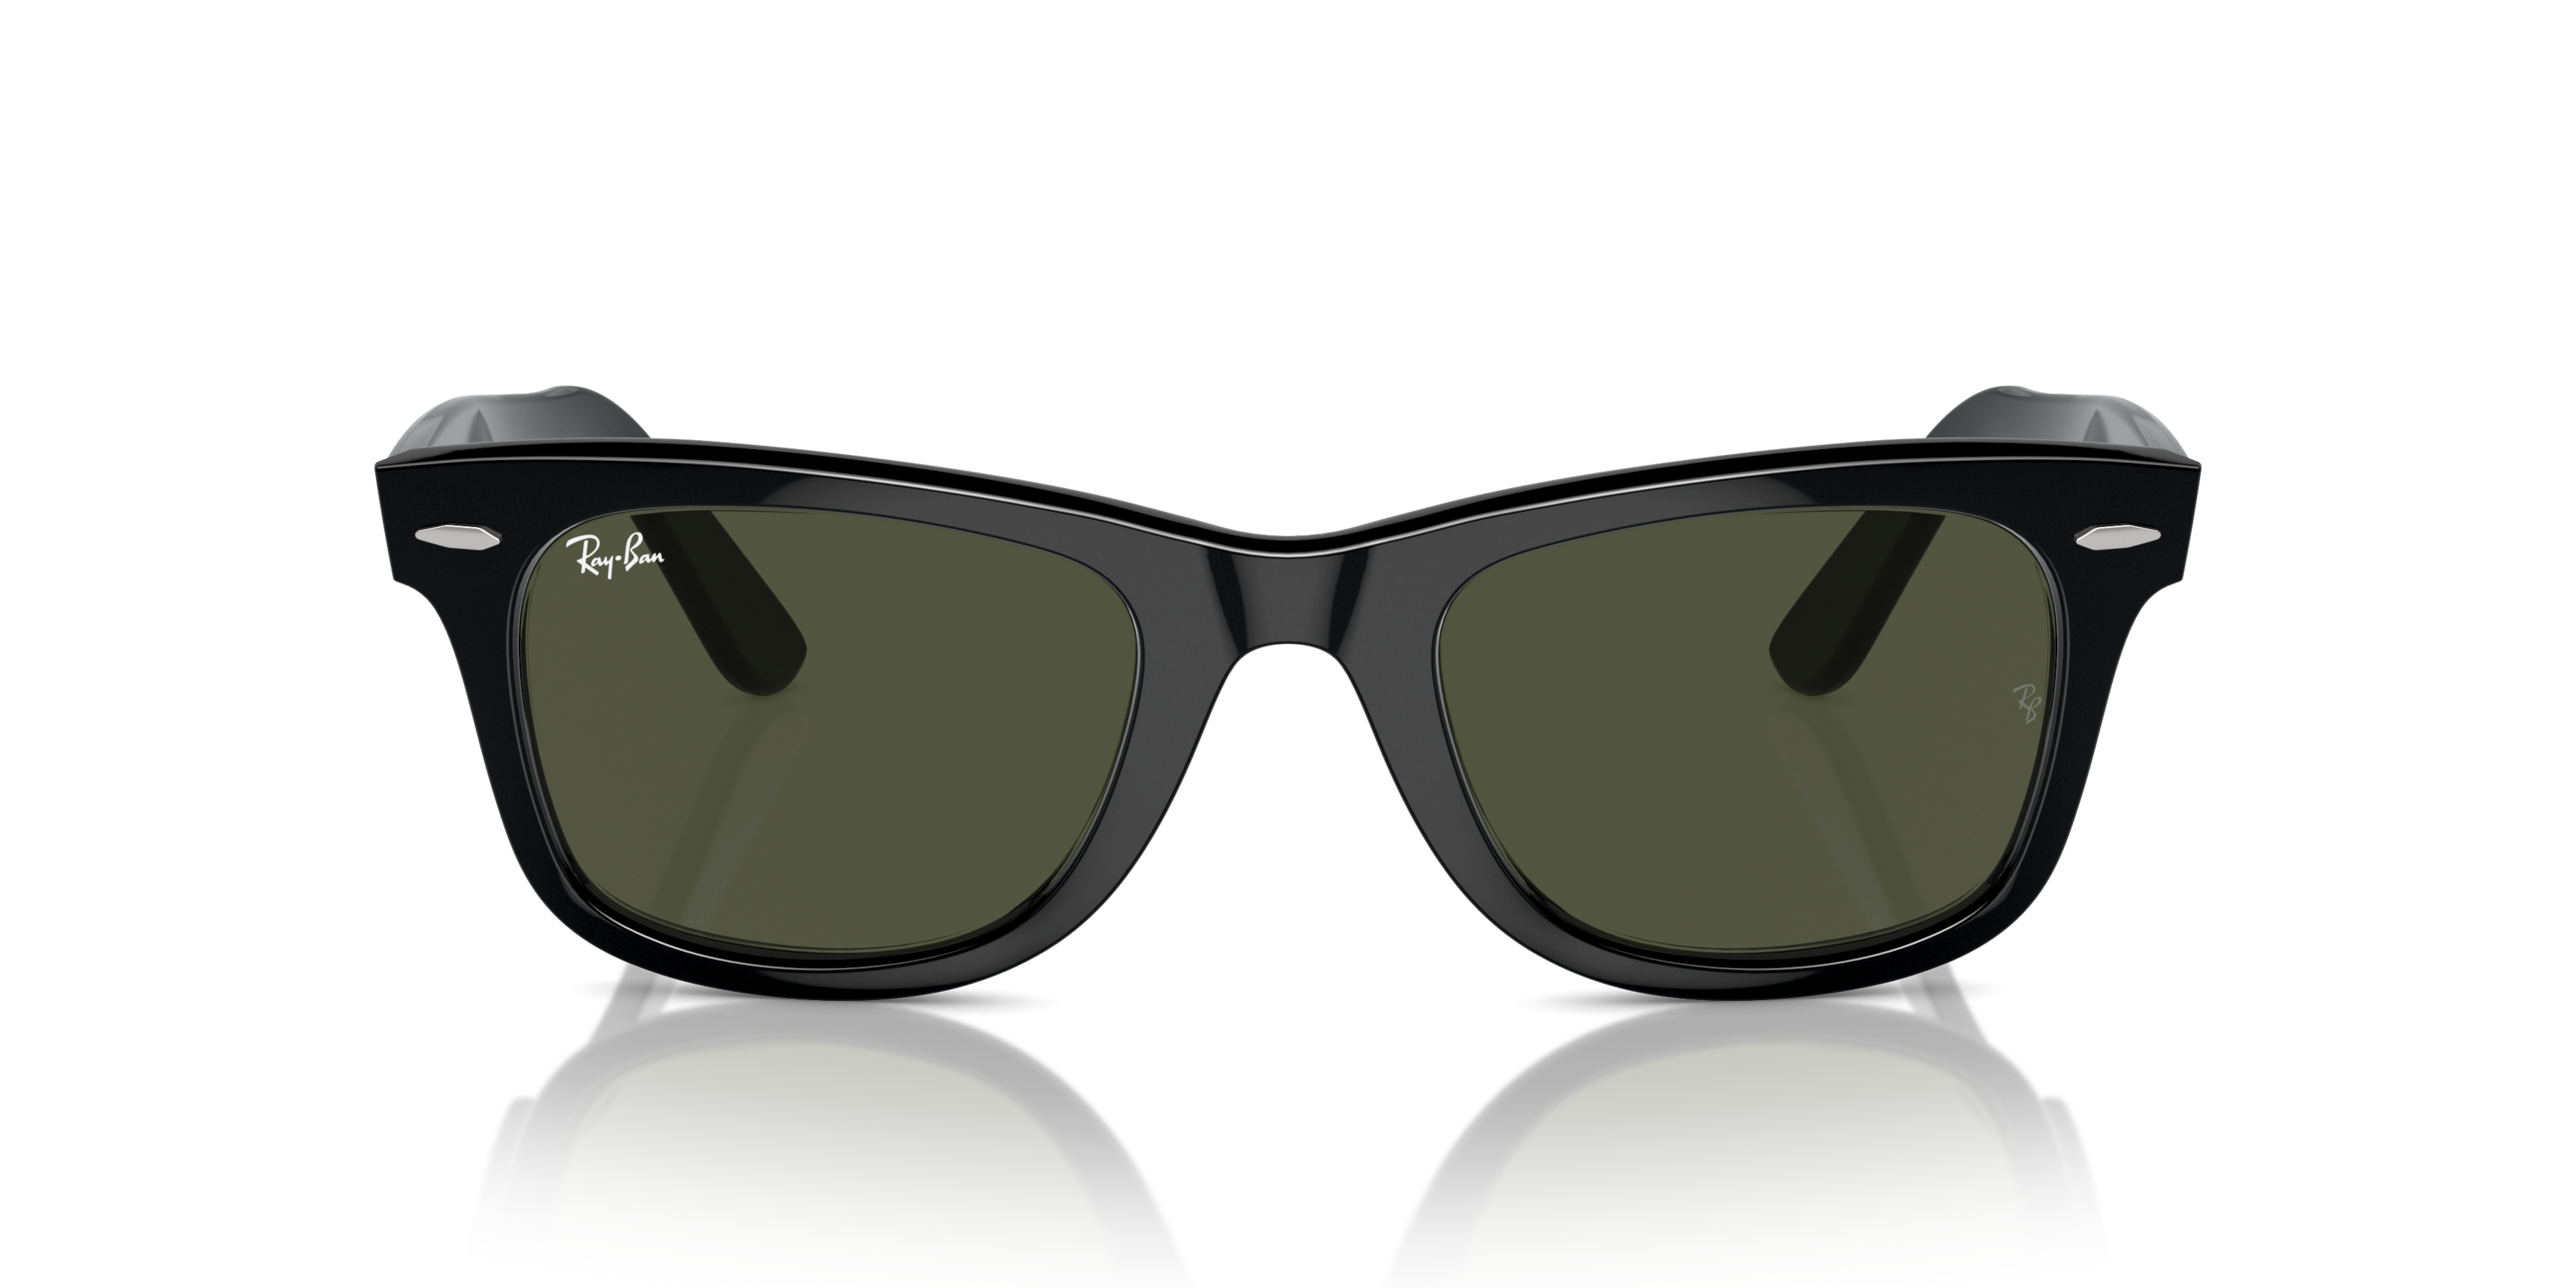 [products.image.front] Ray-Ban Wayfarer RB2140 901